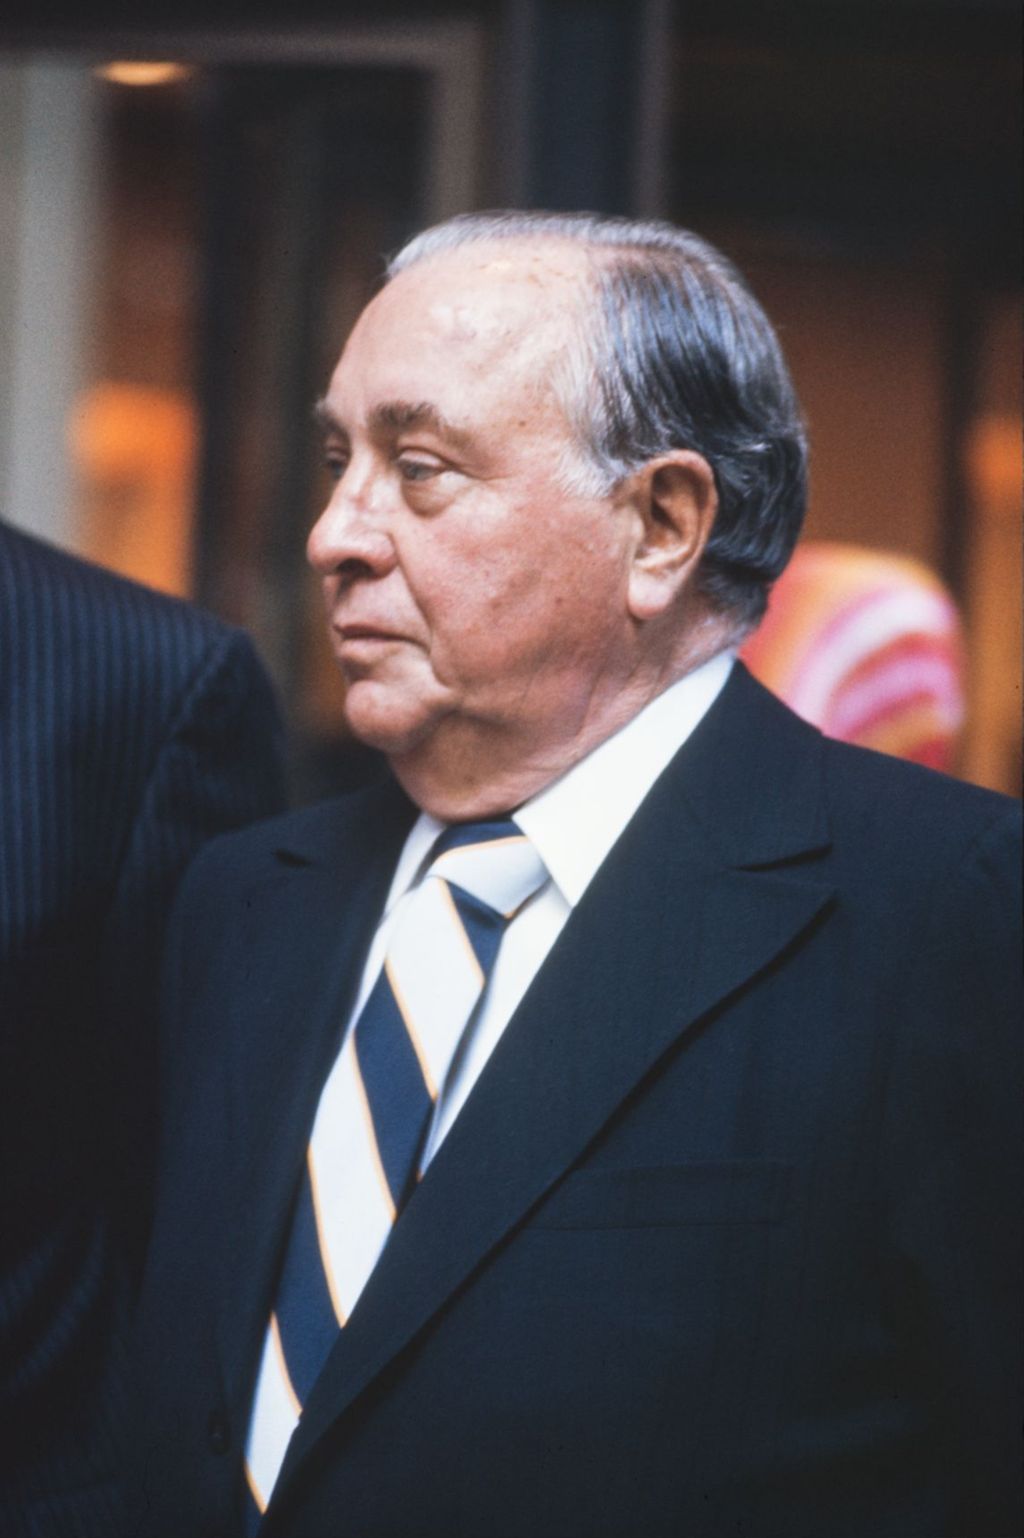 Miniature of Portraits of Richard J. Daley wearing a navy and white striped tie